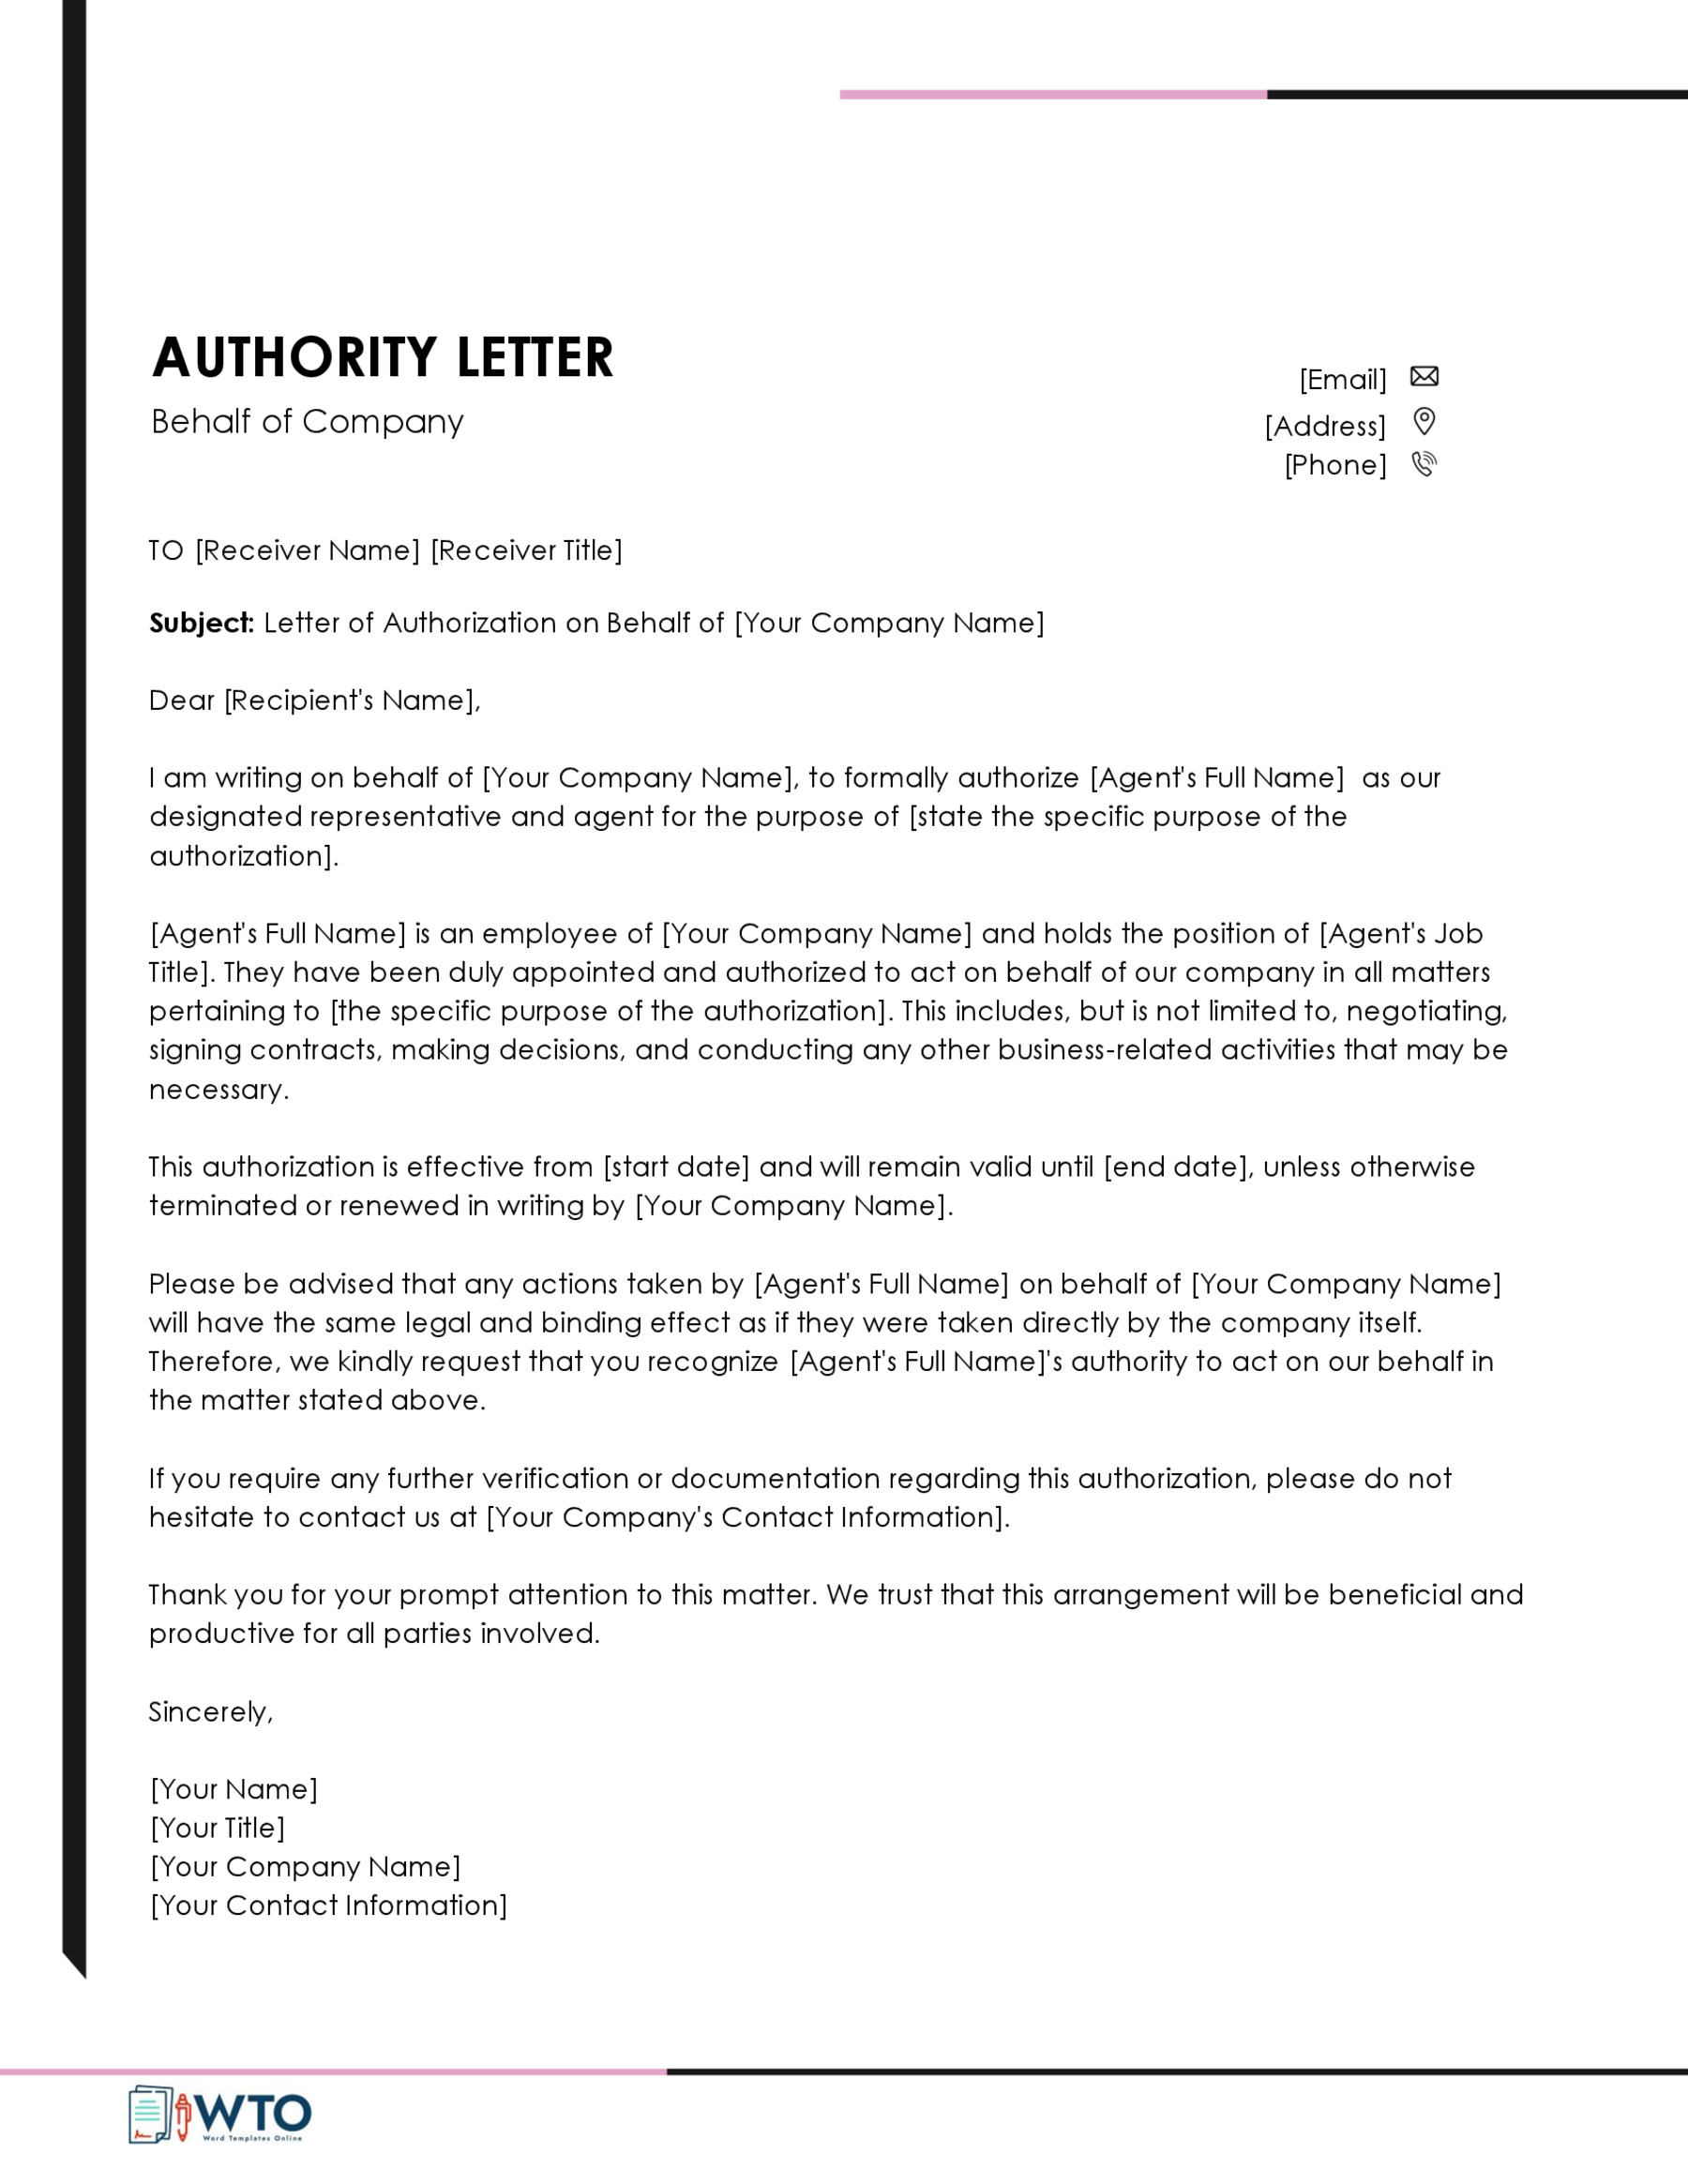 Letter of Behalf of a Company Template in ms word free download